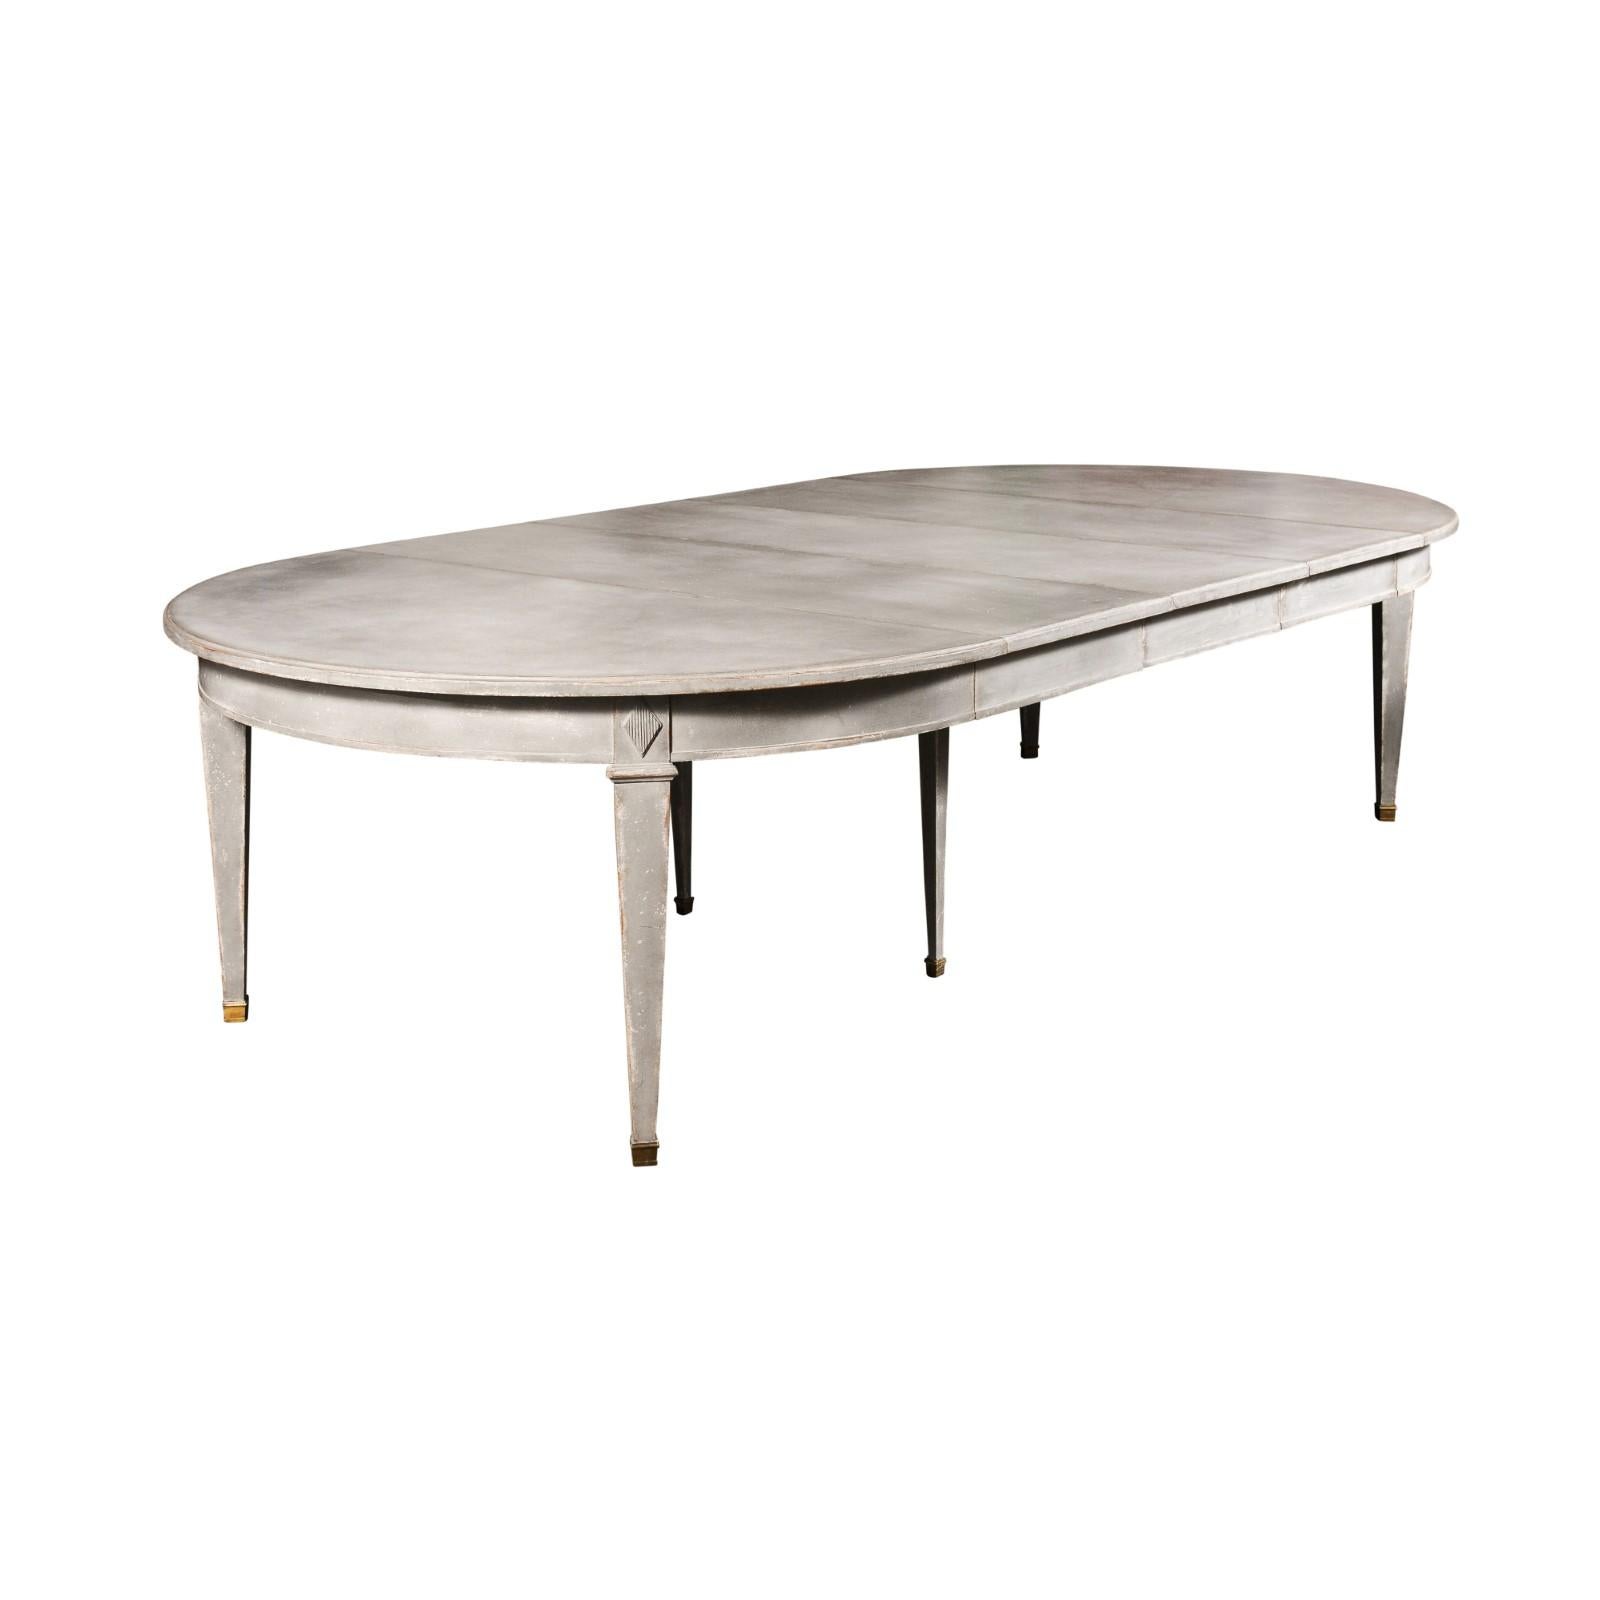 A Swedish Gustavian style painted wood extension dining room table from the early 20th century, with three leaves. Created in Sweden during the early years of the 20th century, this Swedish dining room table features an oval top resting on an apron